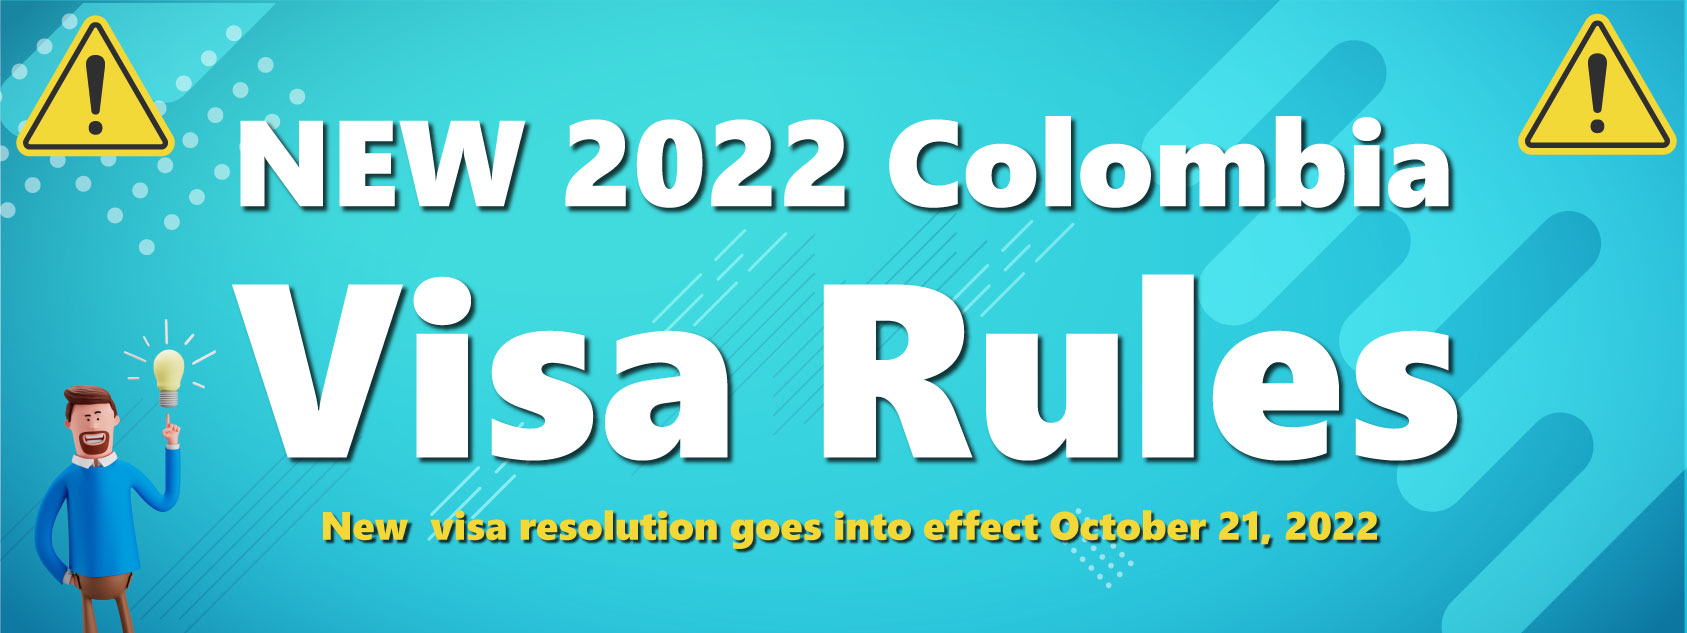 NEW-2022-Colombia-Visa-Law-Resolution